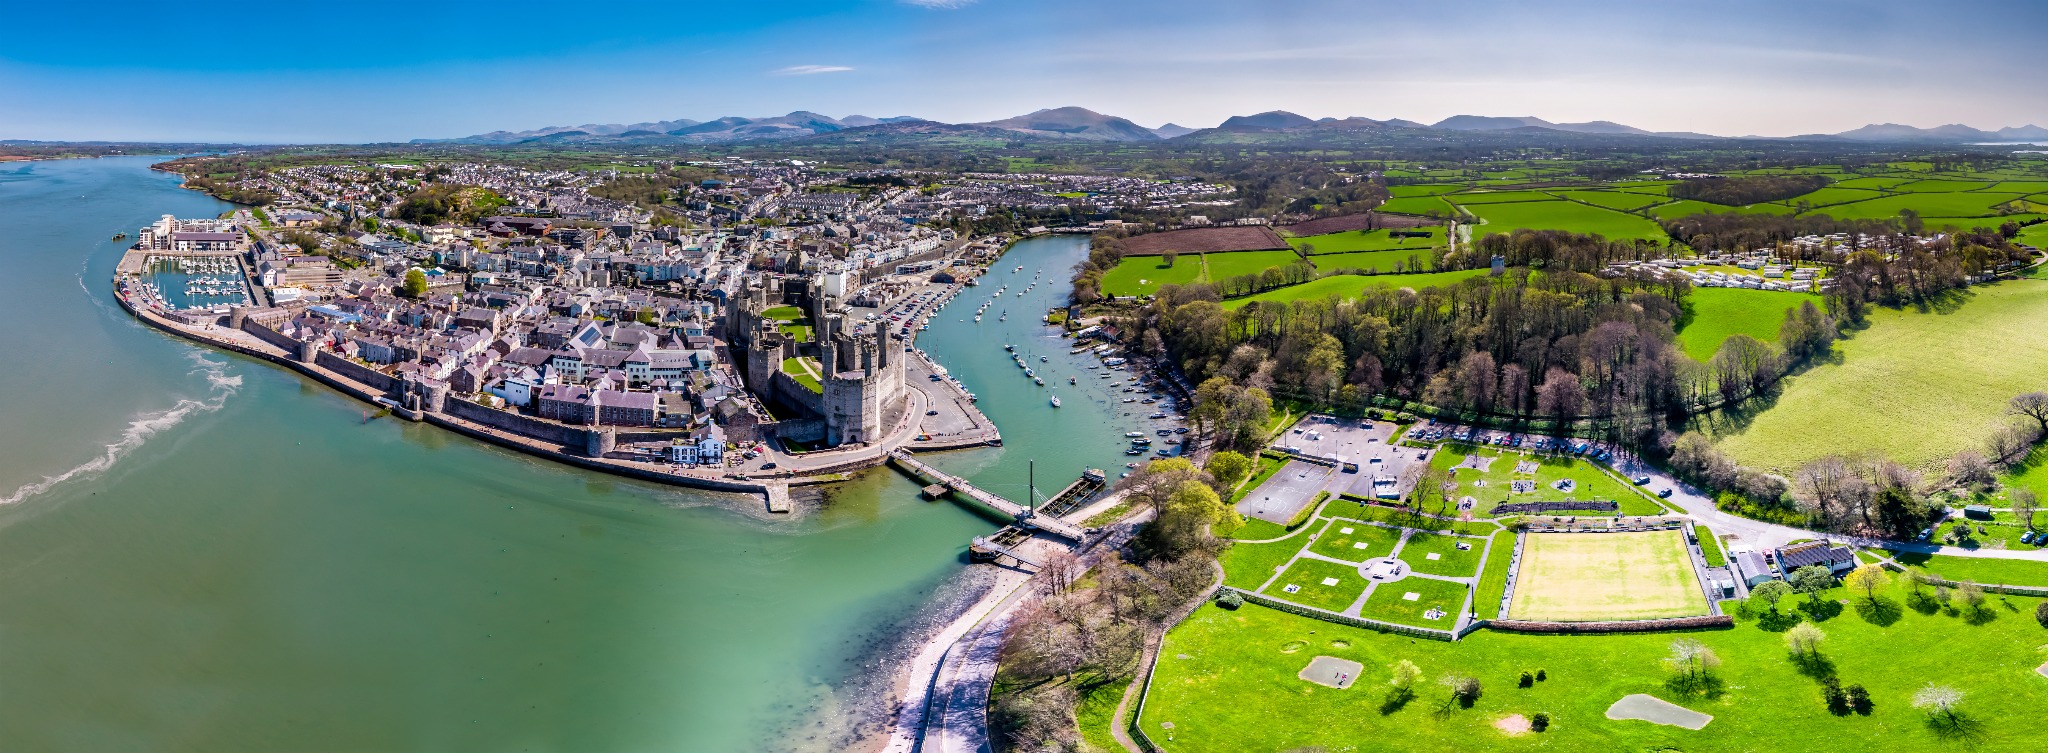 6 Beautiful Cities in Wales You Have to Visit